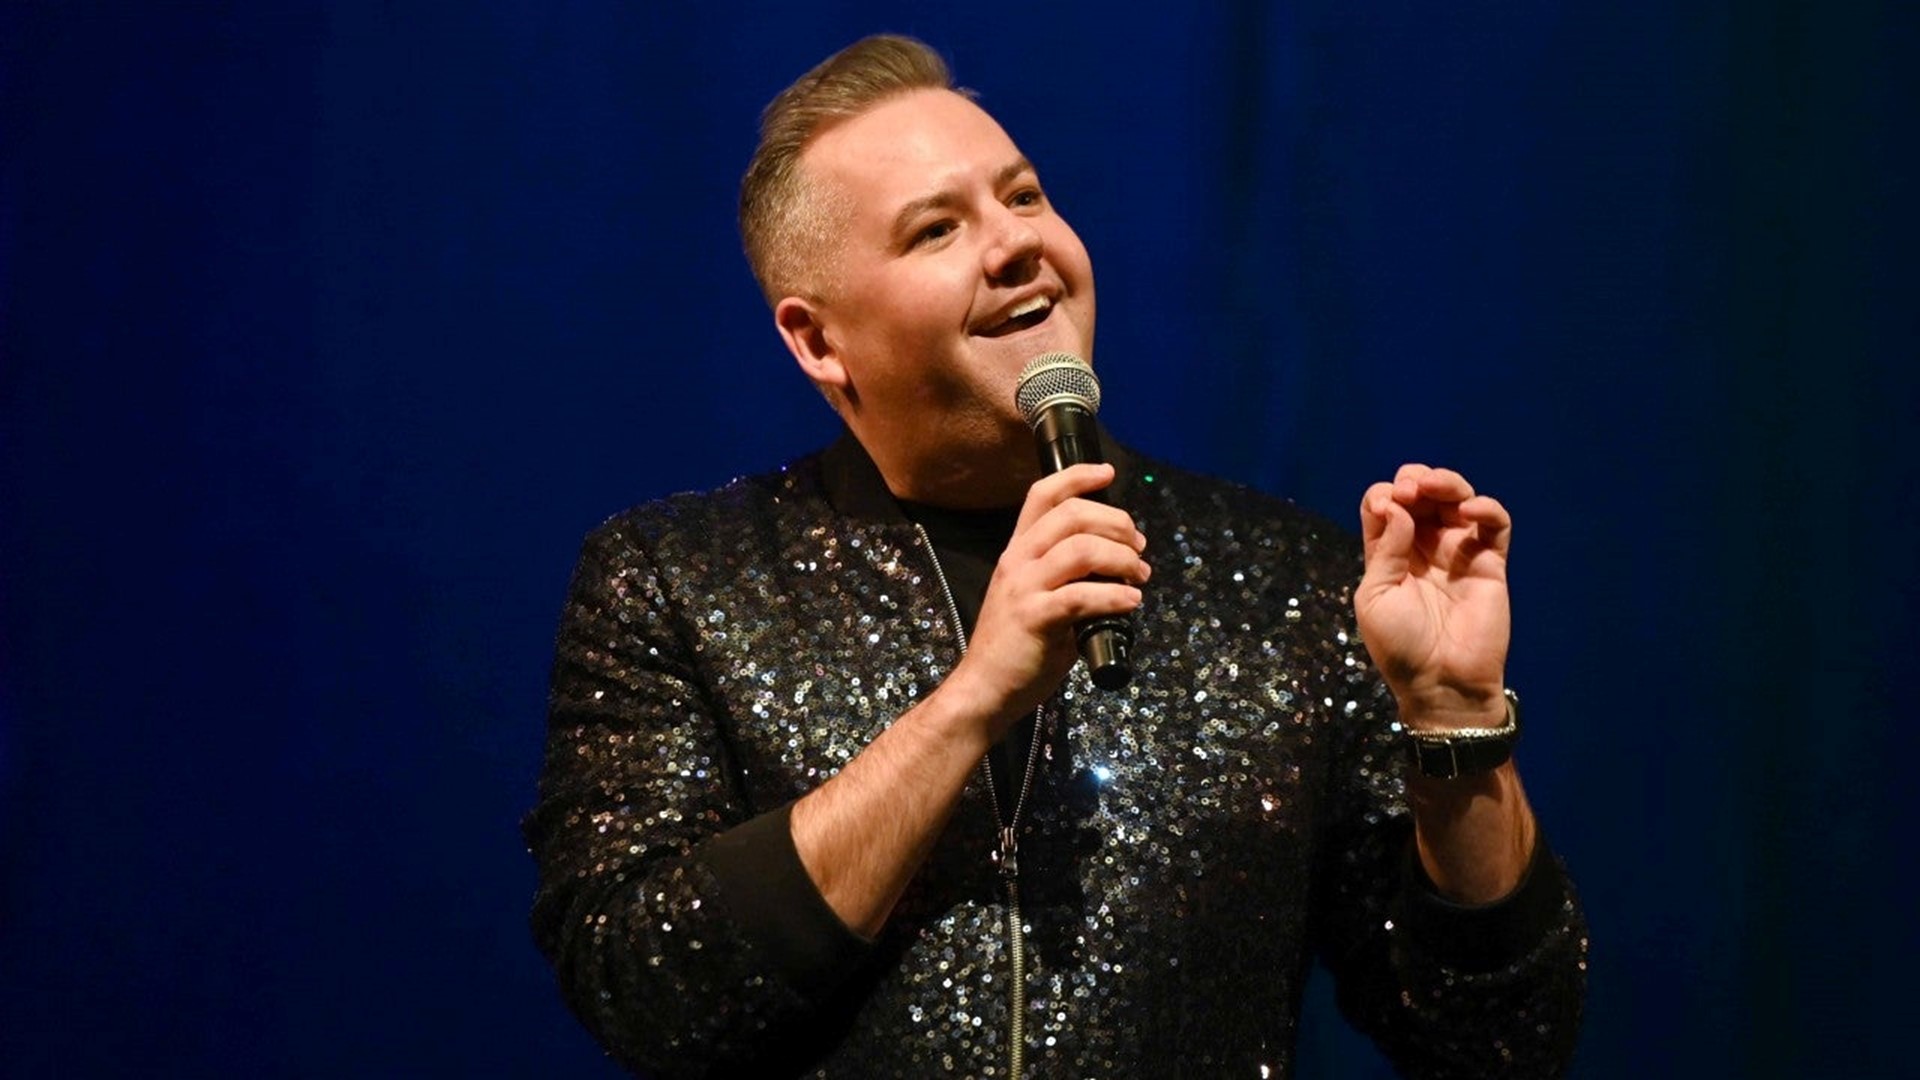 Ross Mathews Announces Engagement See the Pic!